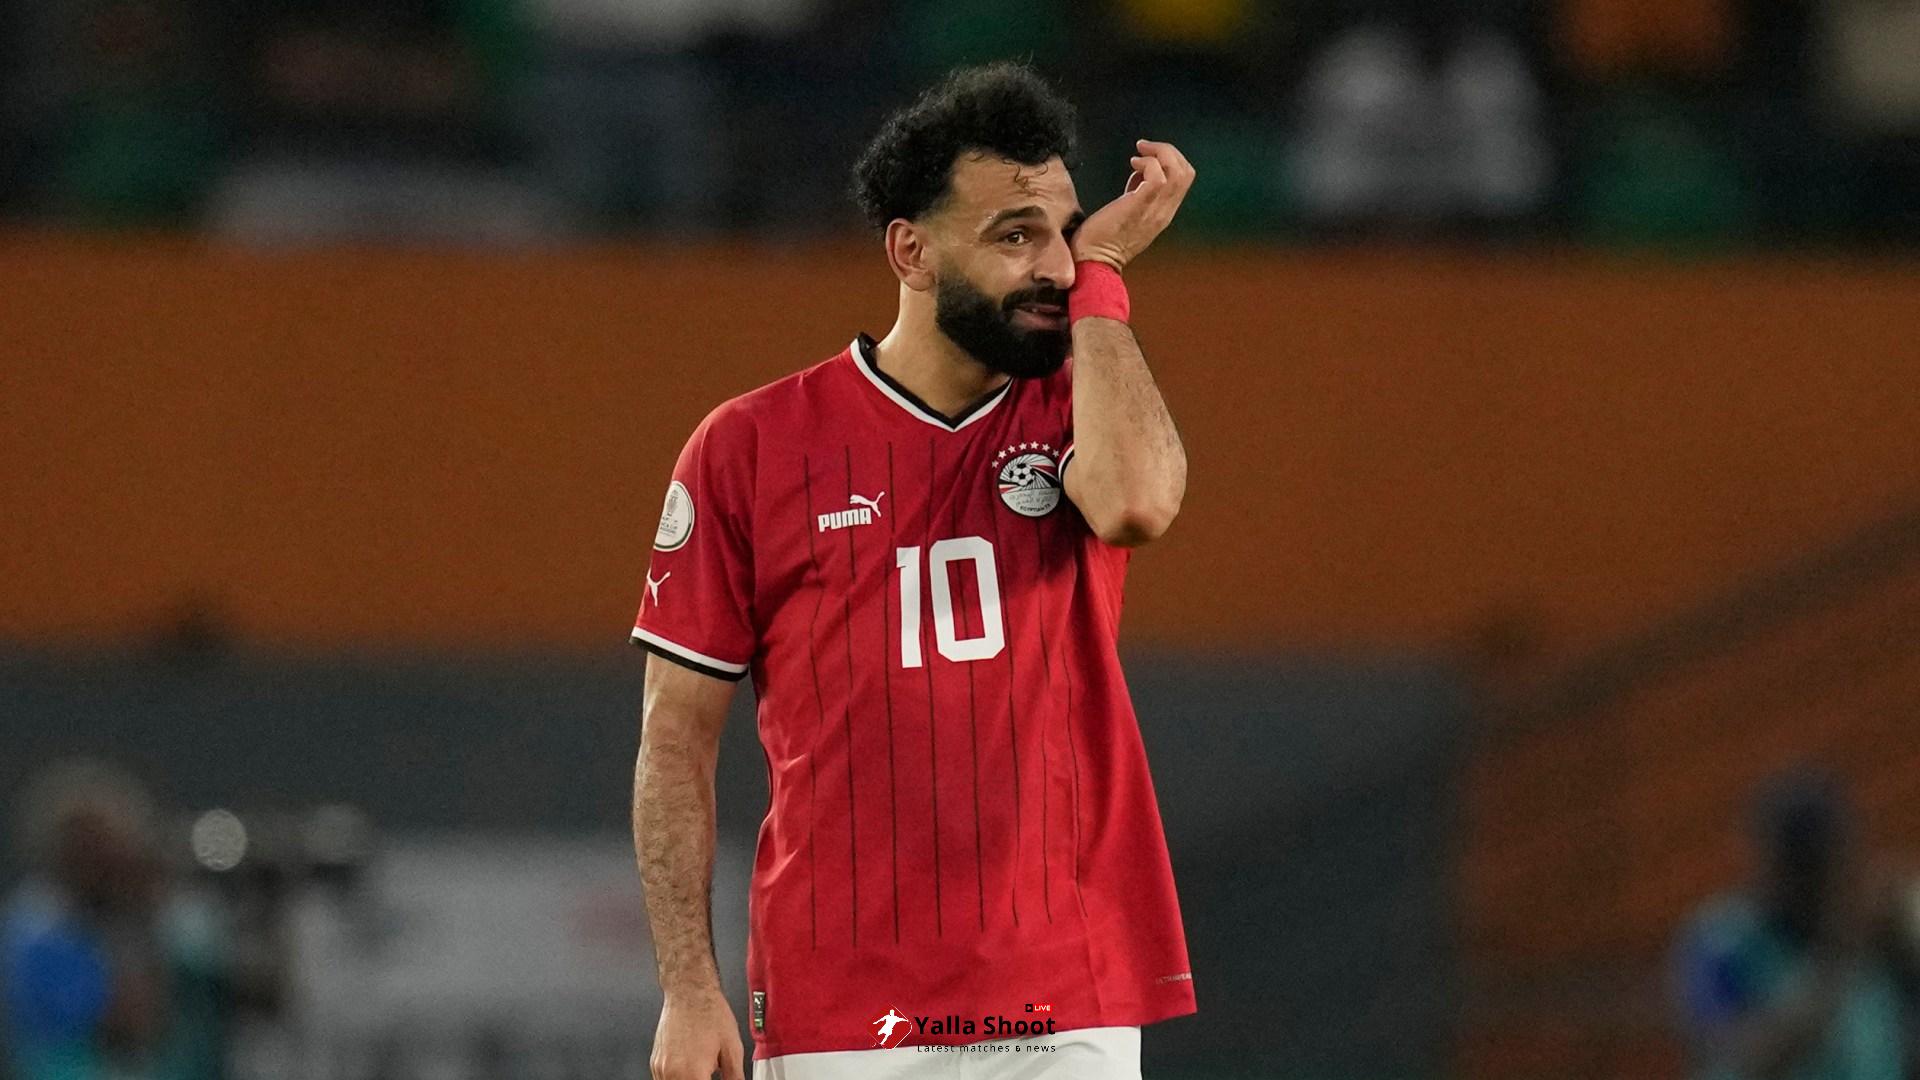 Klopp will be a happy man as Mo Salah's Egypt are stunned by 111th-ranked Mozambique at Afcon